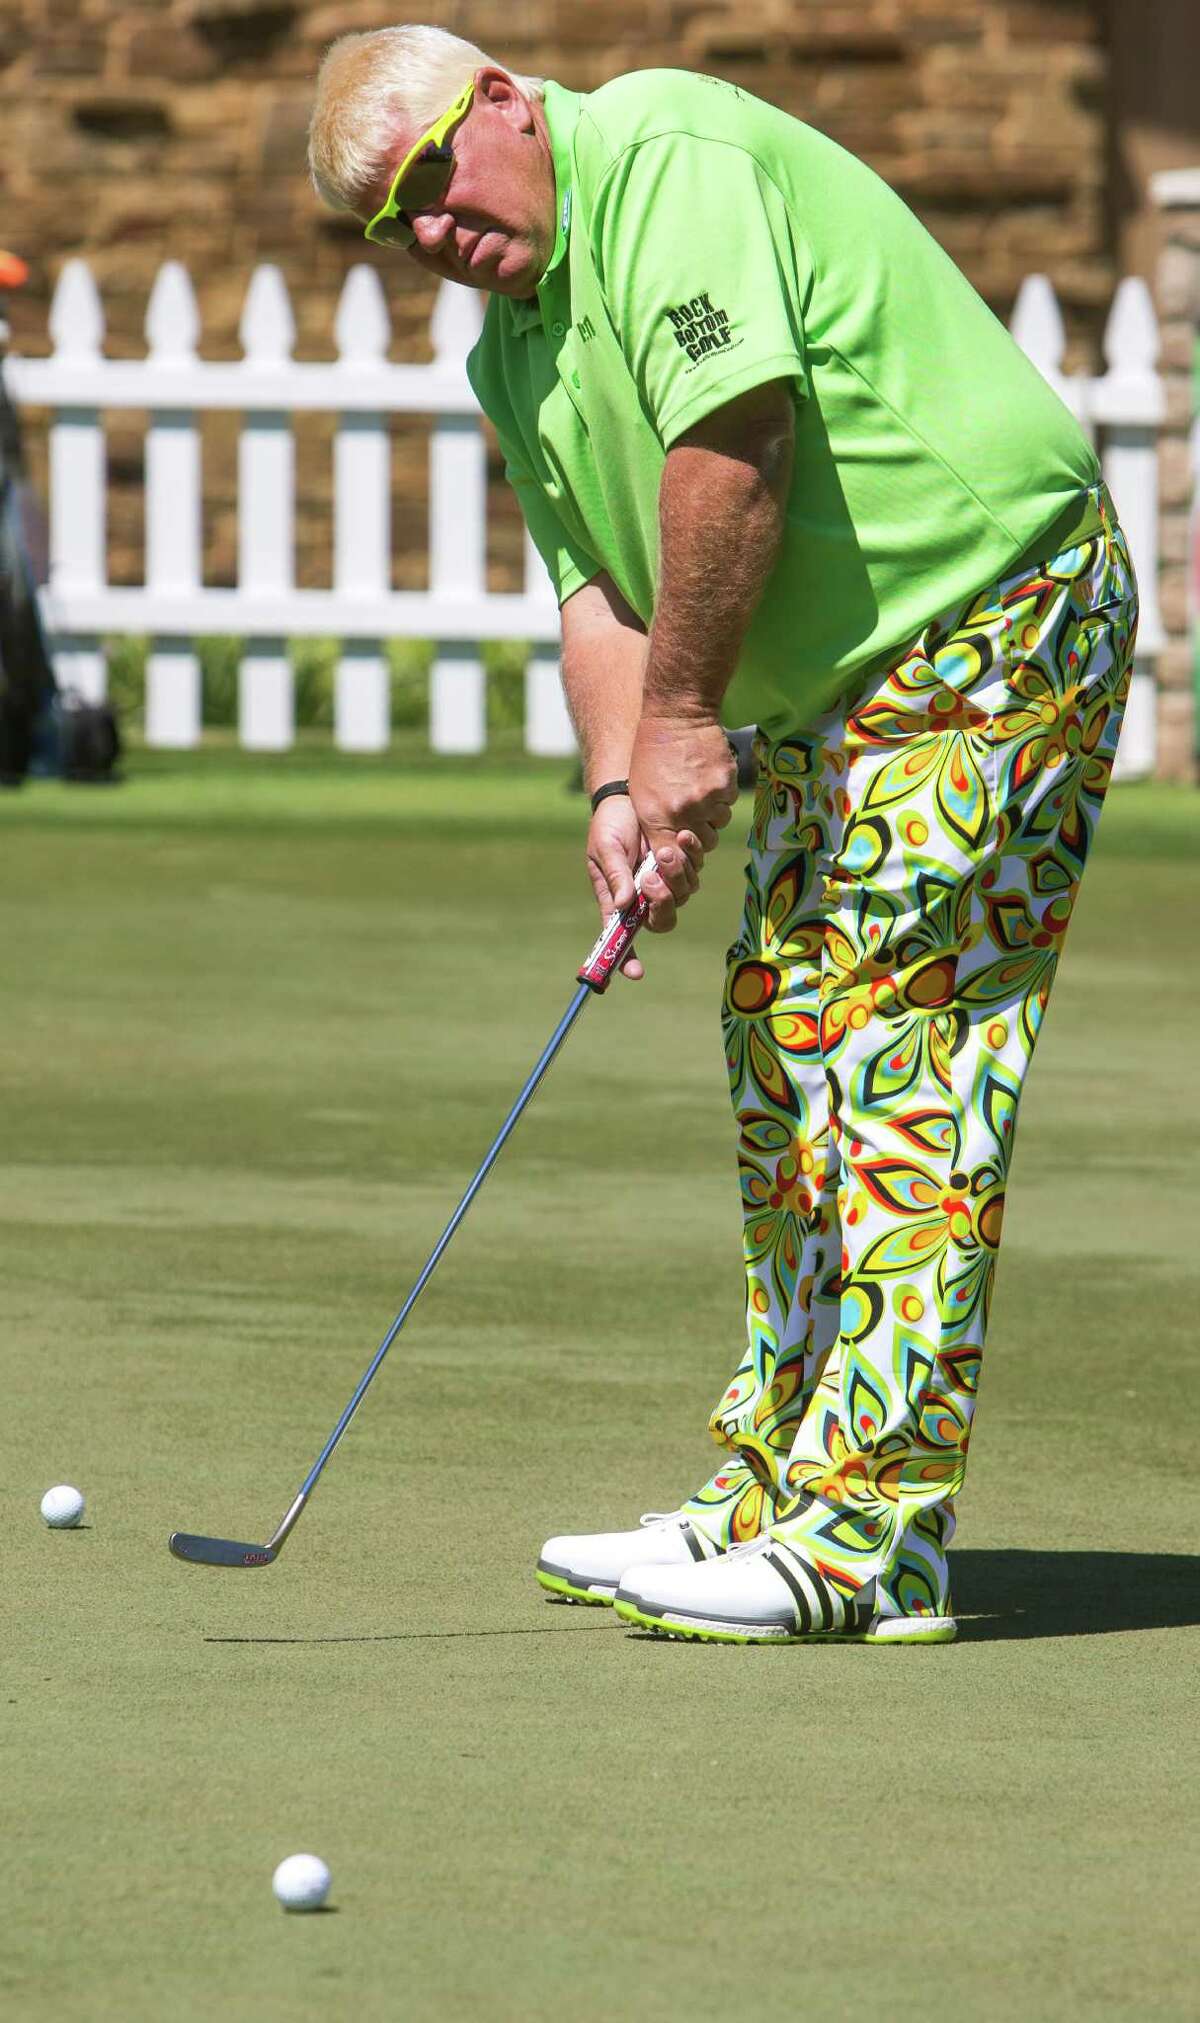 John Daly putts on the practice green before participating in the PGA TOUR Champions Insperity Invitational Pro-Am on Wednesday, May 4, 2016, in The Woodlands. Daly, who recently turned 50, makes his PGA TOUR Champions debut at the Insperity Invitational.